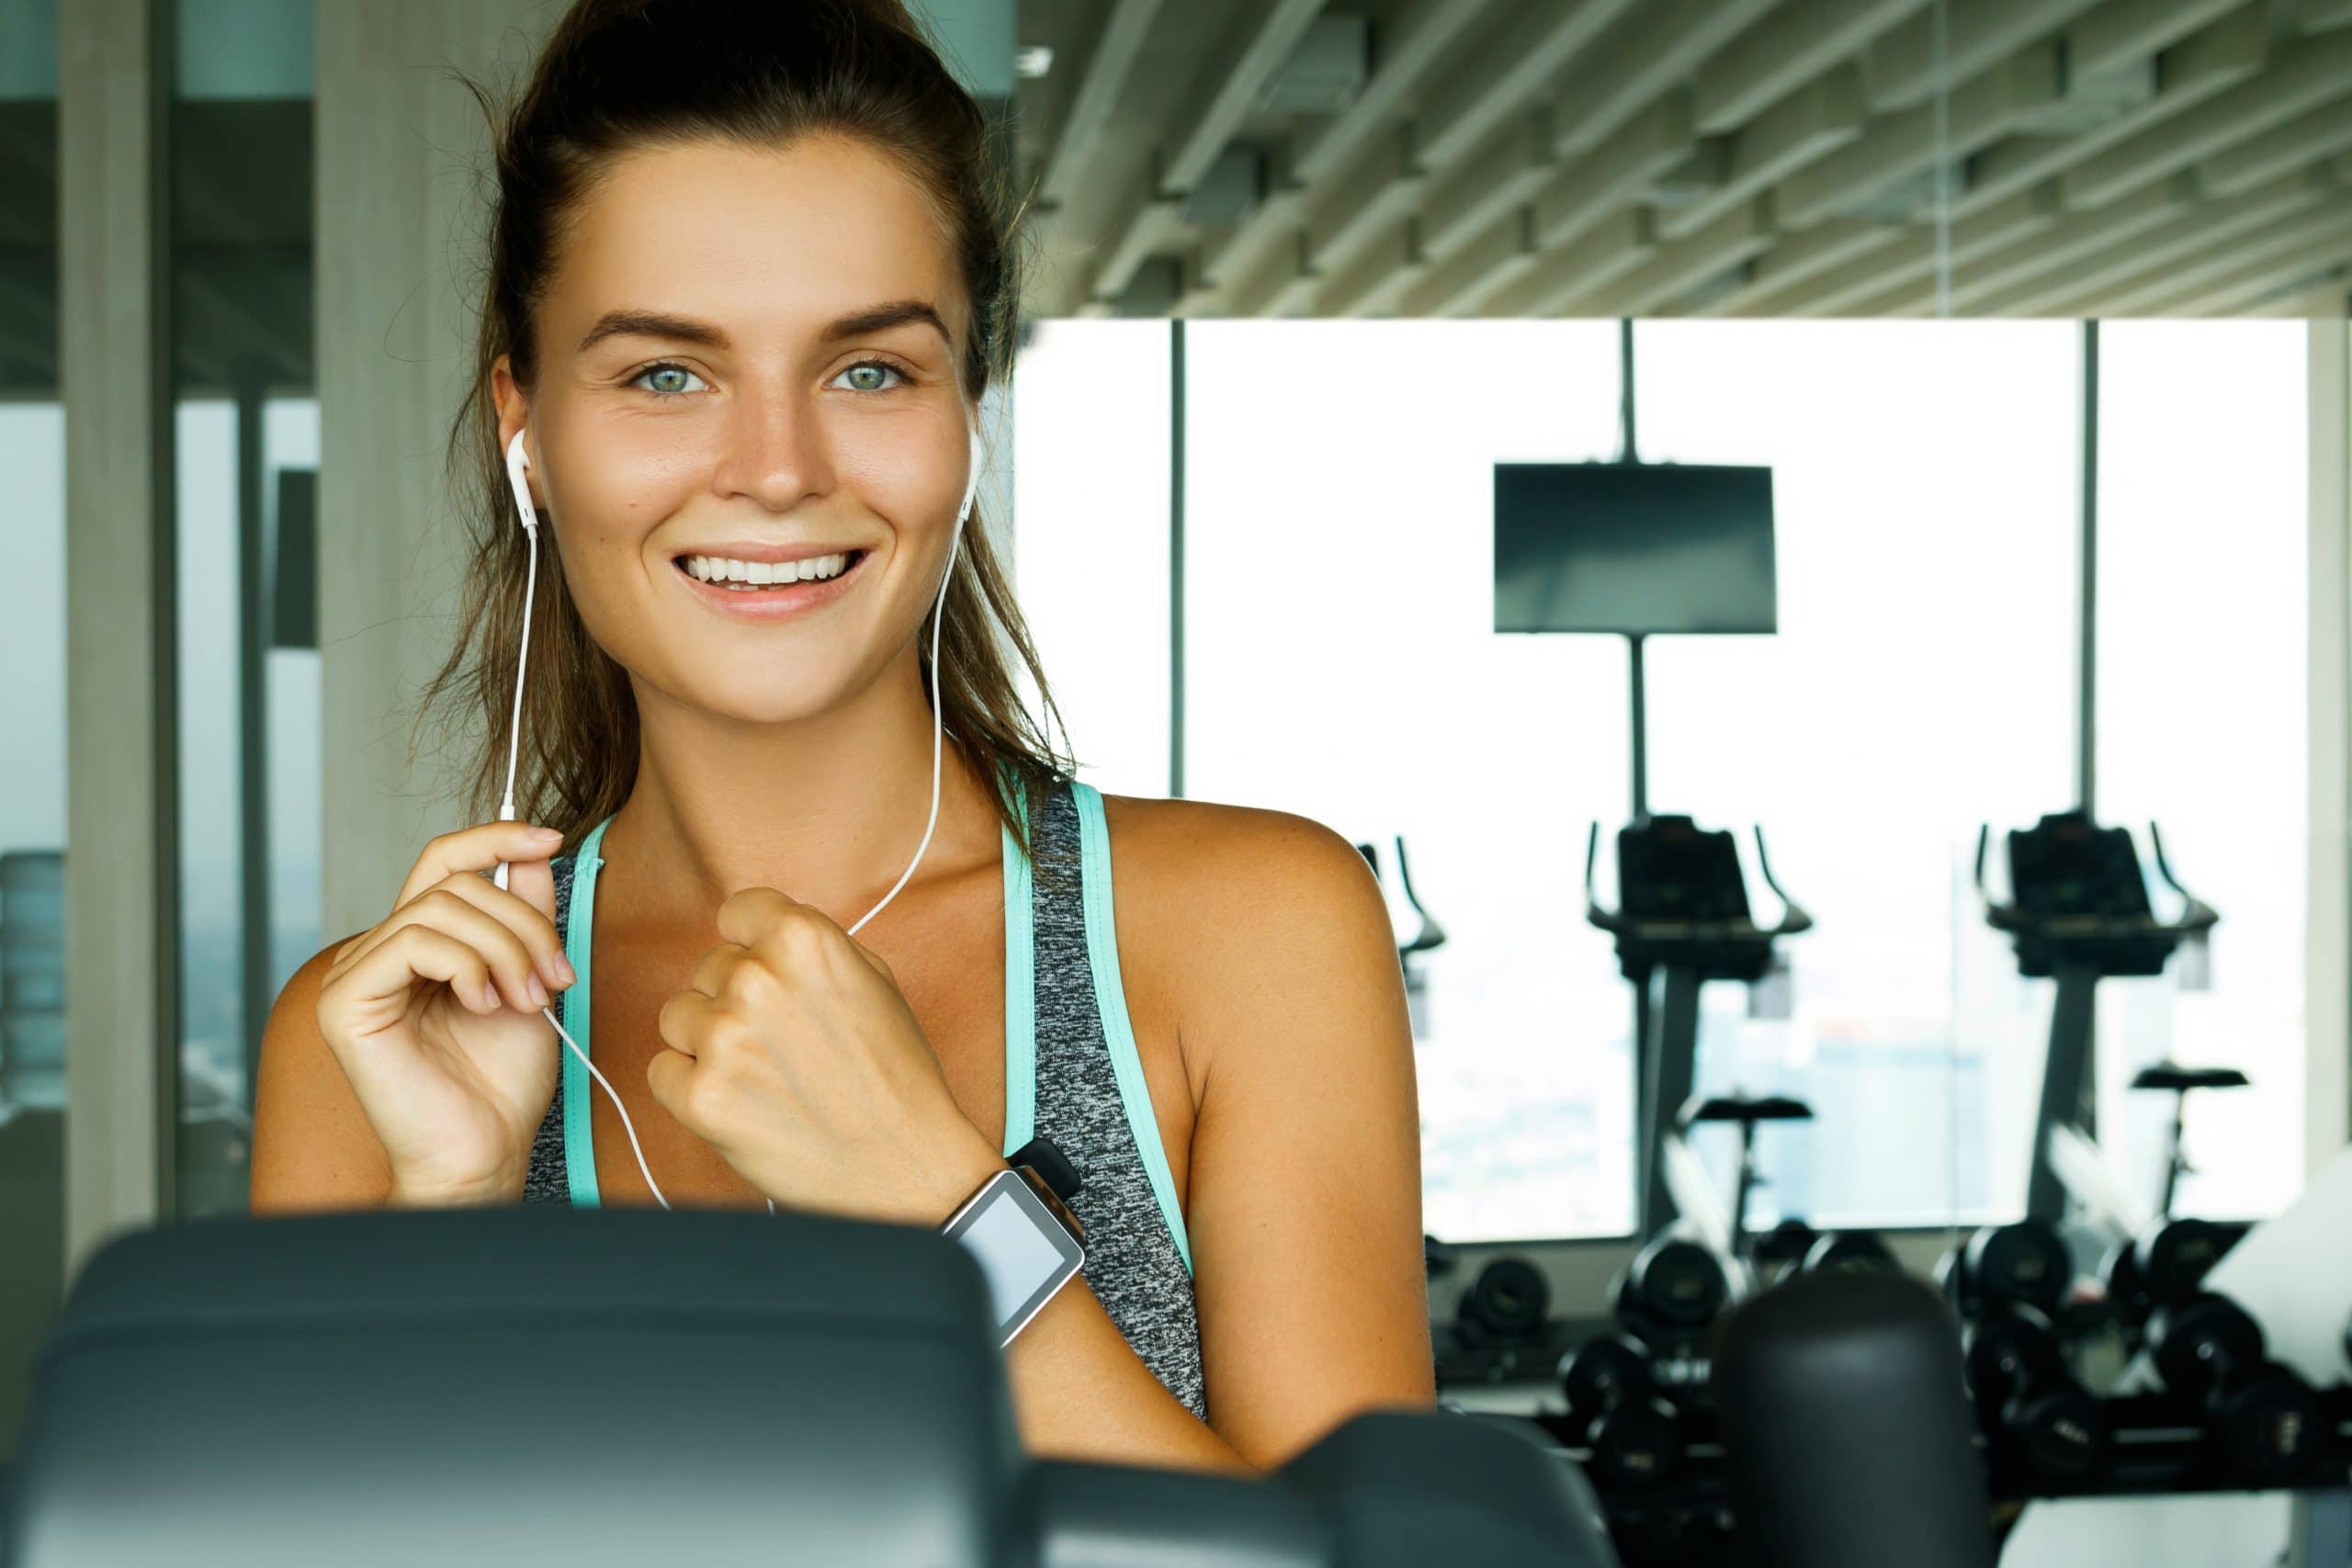 10 Hottest Songs to Add in Your Workout Playlist to Get Extra Pumped